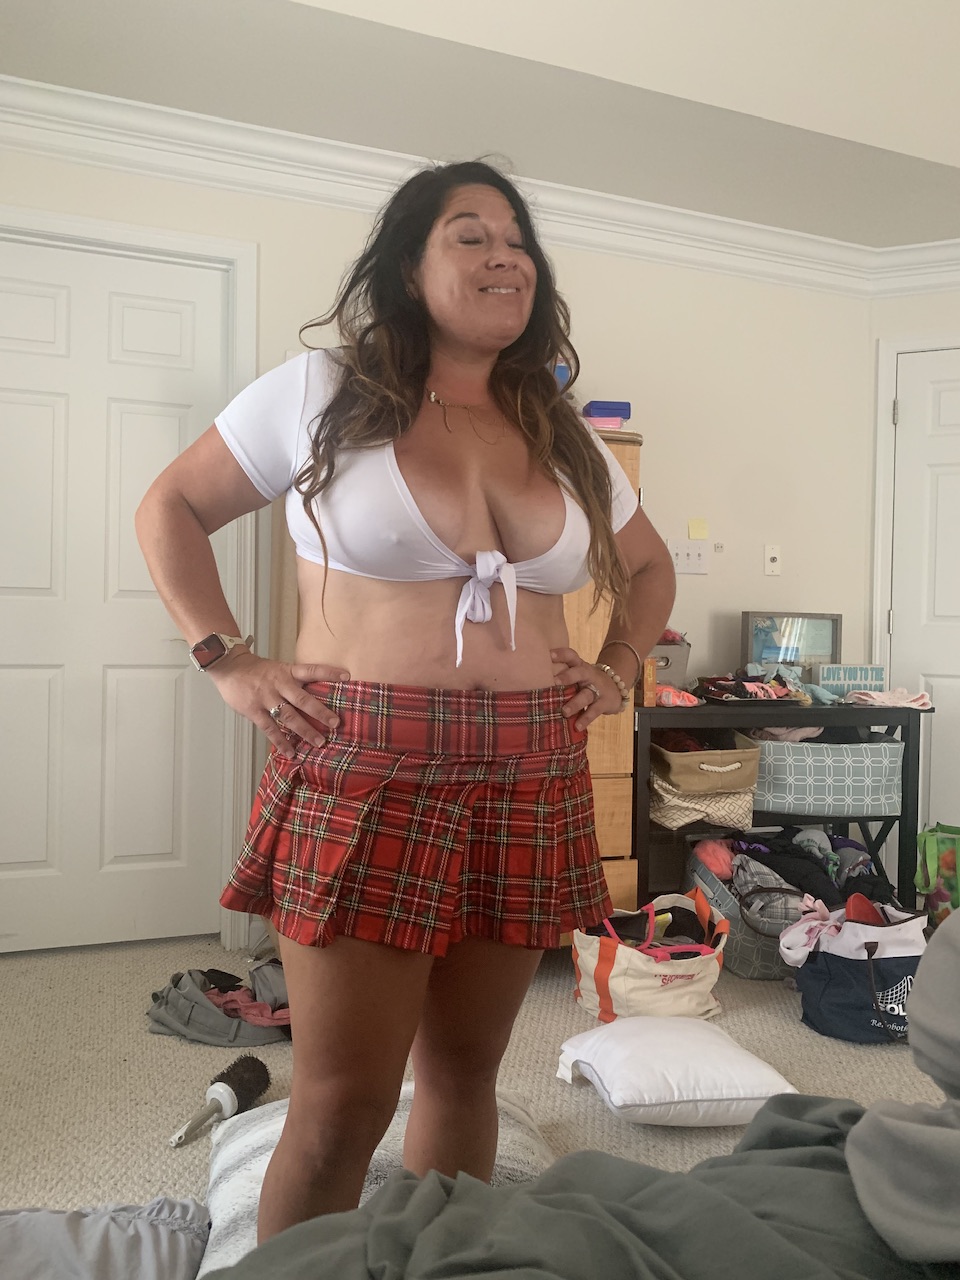 Fat fuckpig Karlie exposed cheating and being a whore